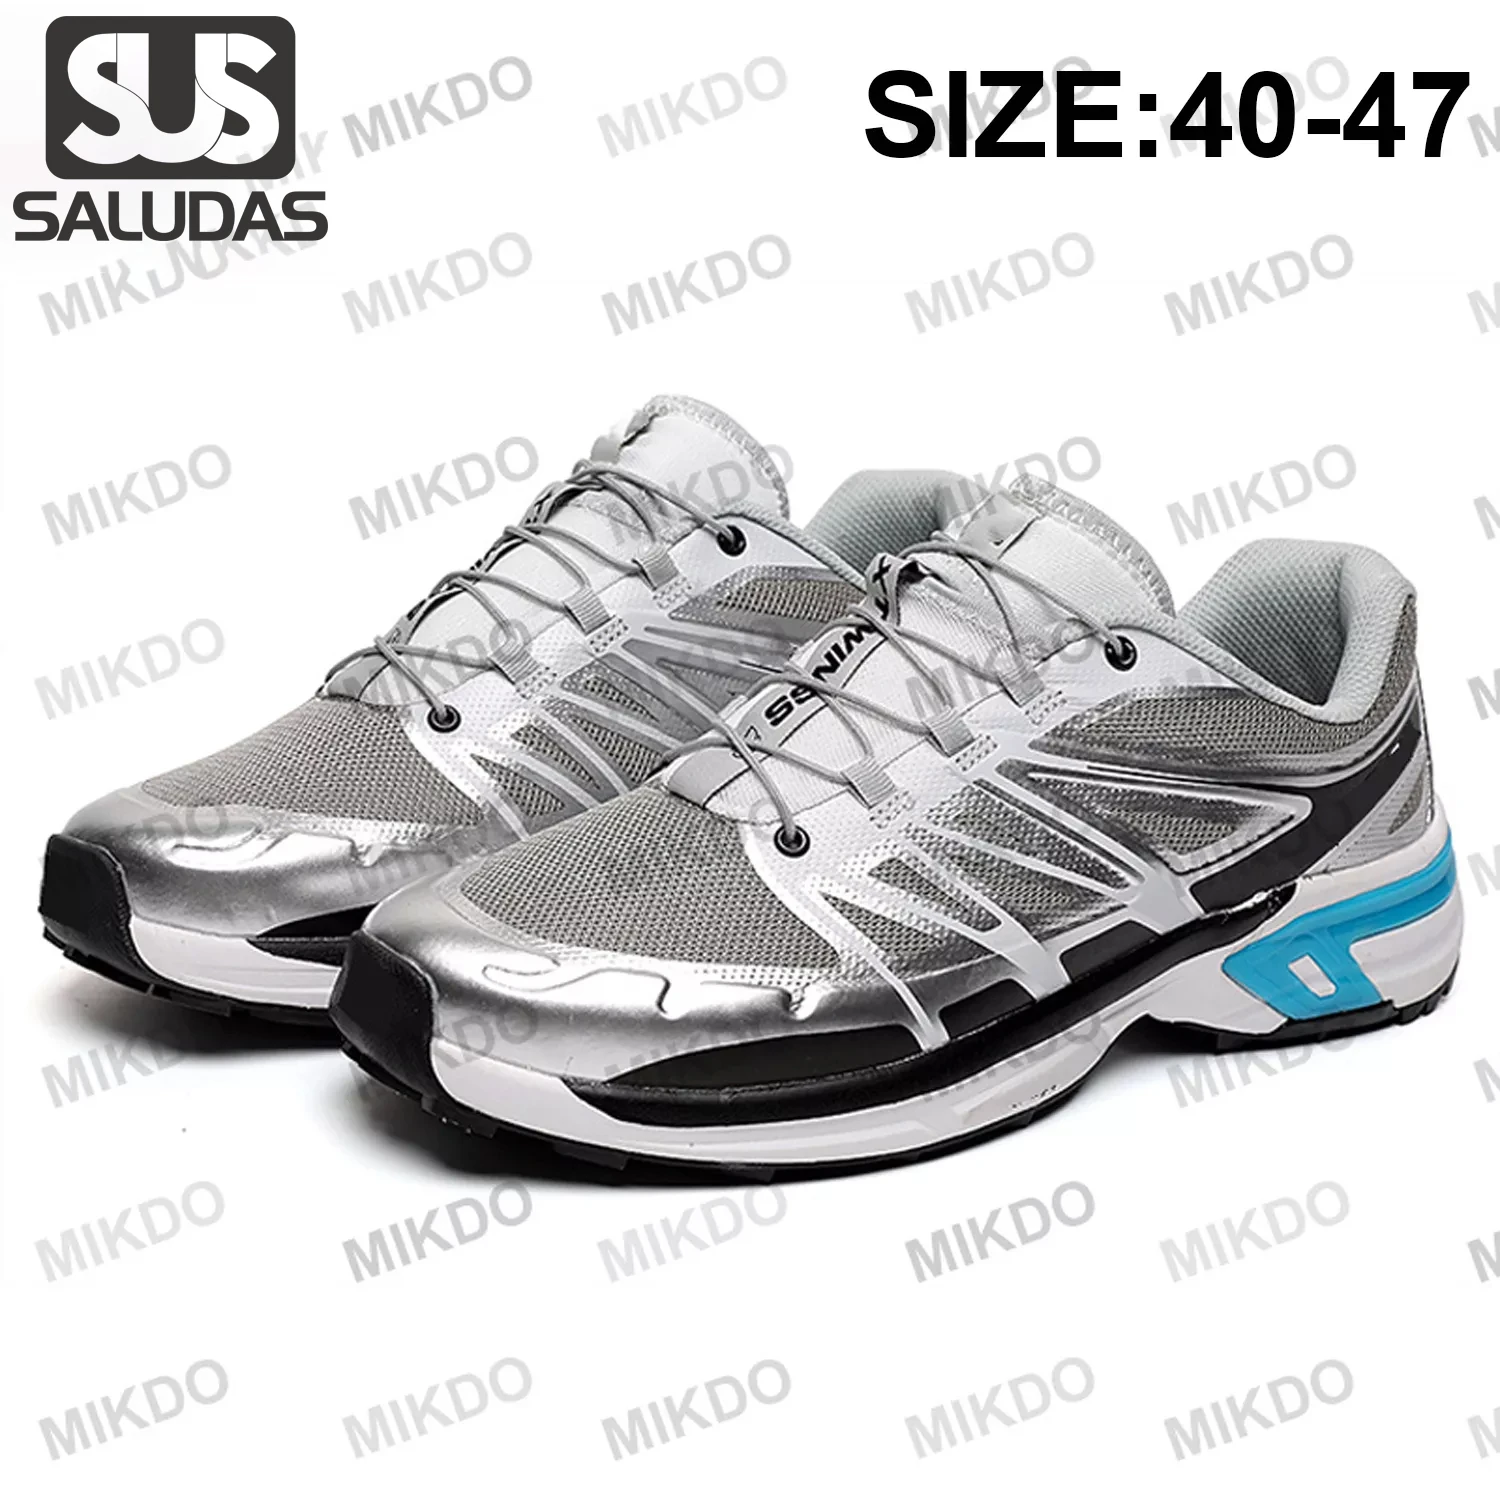 

SALUDAS Trail Shoes Men Outdoor Marathon Breathable Running Shoes Wear-resistant Hiking Shoes XT-wings Men Running Sneakers